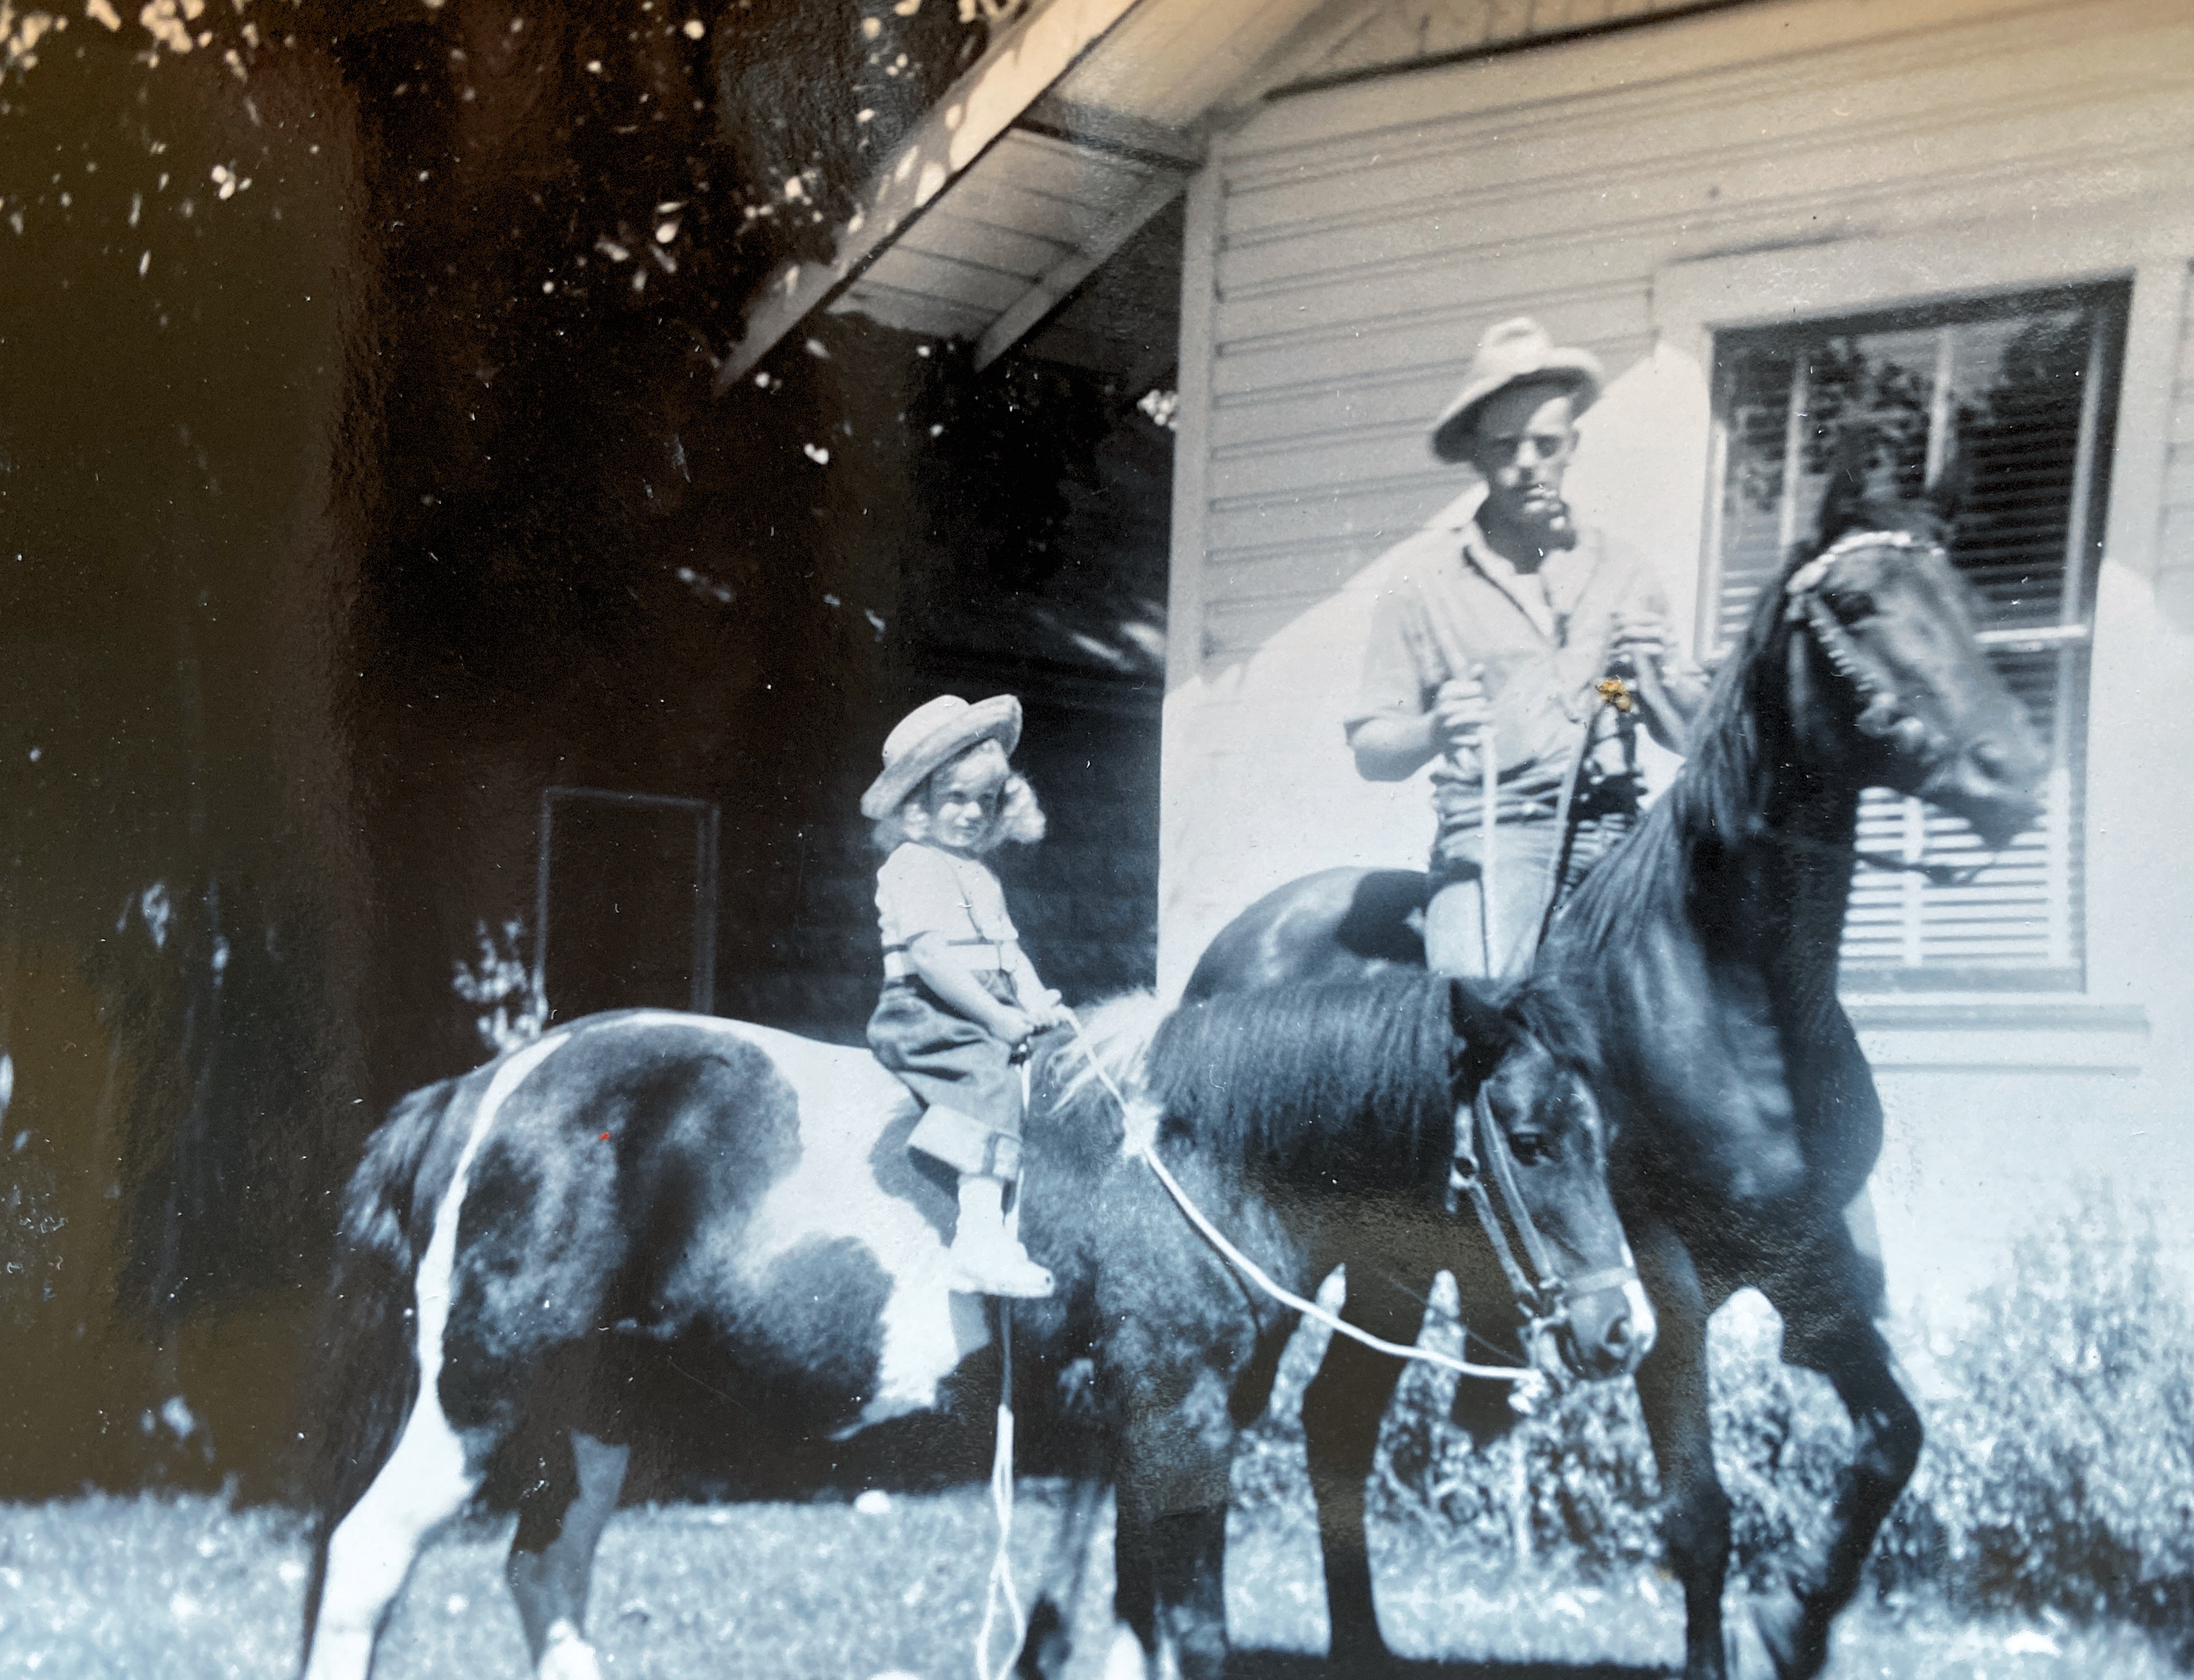 My dad and I maybe around 3yrs of age. The pony , Buster was my dad’s as a boy. Pony lived to a ripe old age. Photo probably around 1947.